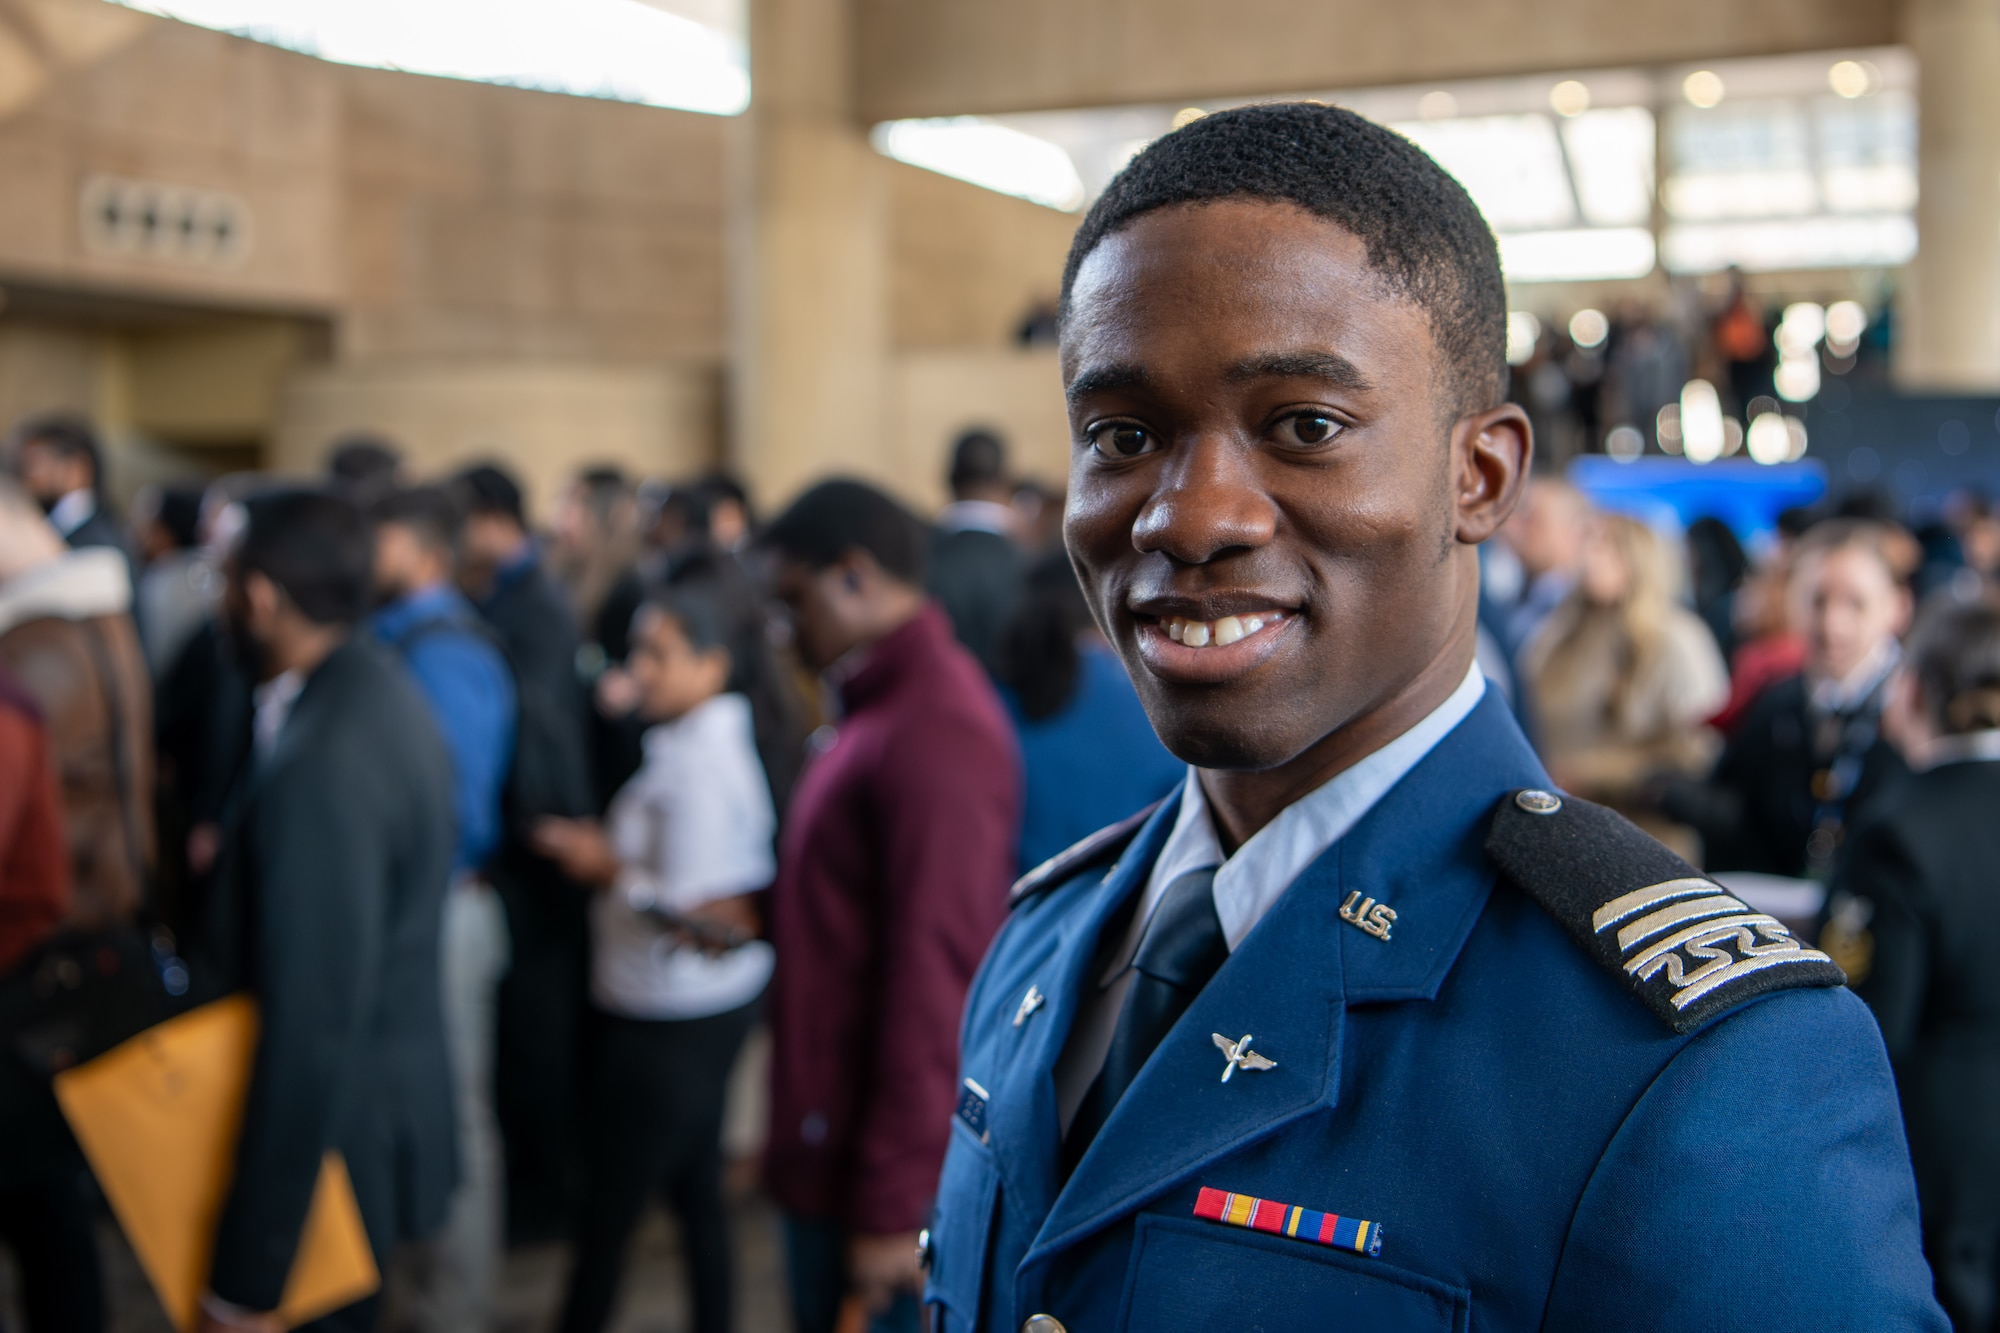 U.S. Air Force Academy Cadet Jabari Bowen prepares to register for the 2024 Black Engineer of the Year Awards, Science, Technology, Engineering and Mathematics Conference, Baltimore, Md., Feb. 15-17, 2024. Bowen is the recipient of the STEM Student Leadership – Undergraduate Level Award; the prestigious honor celebrates Bowen's outstanding contributions to leadership, academics and service within the STEM fields. (U.S. Air Force photo by Capt. Shane Ellis)